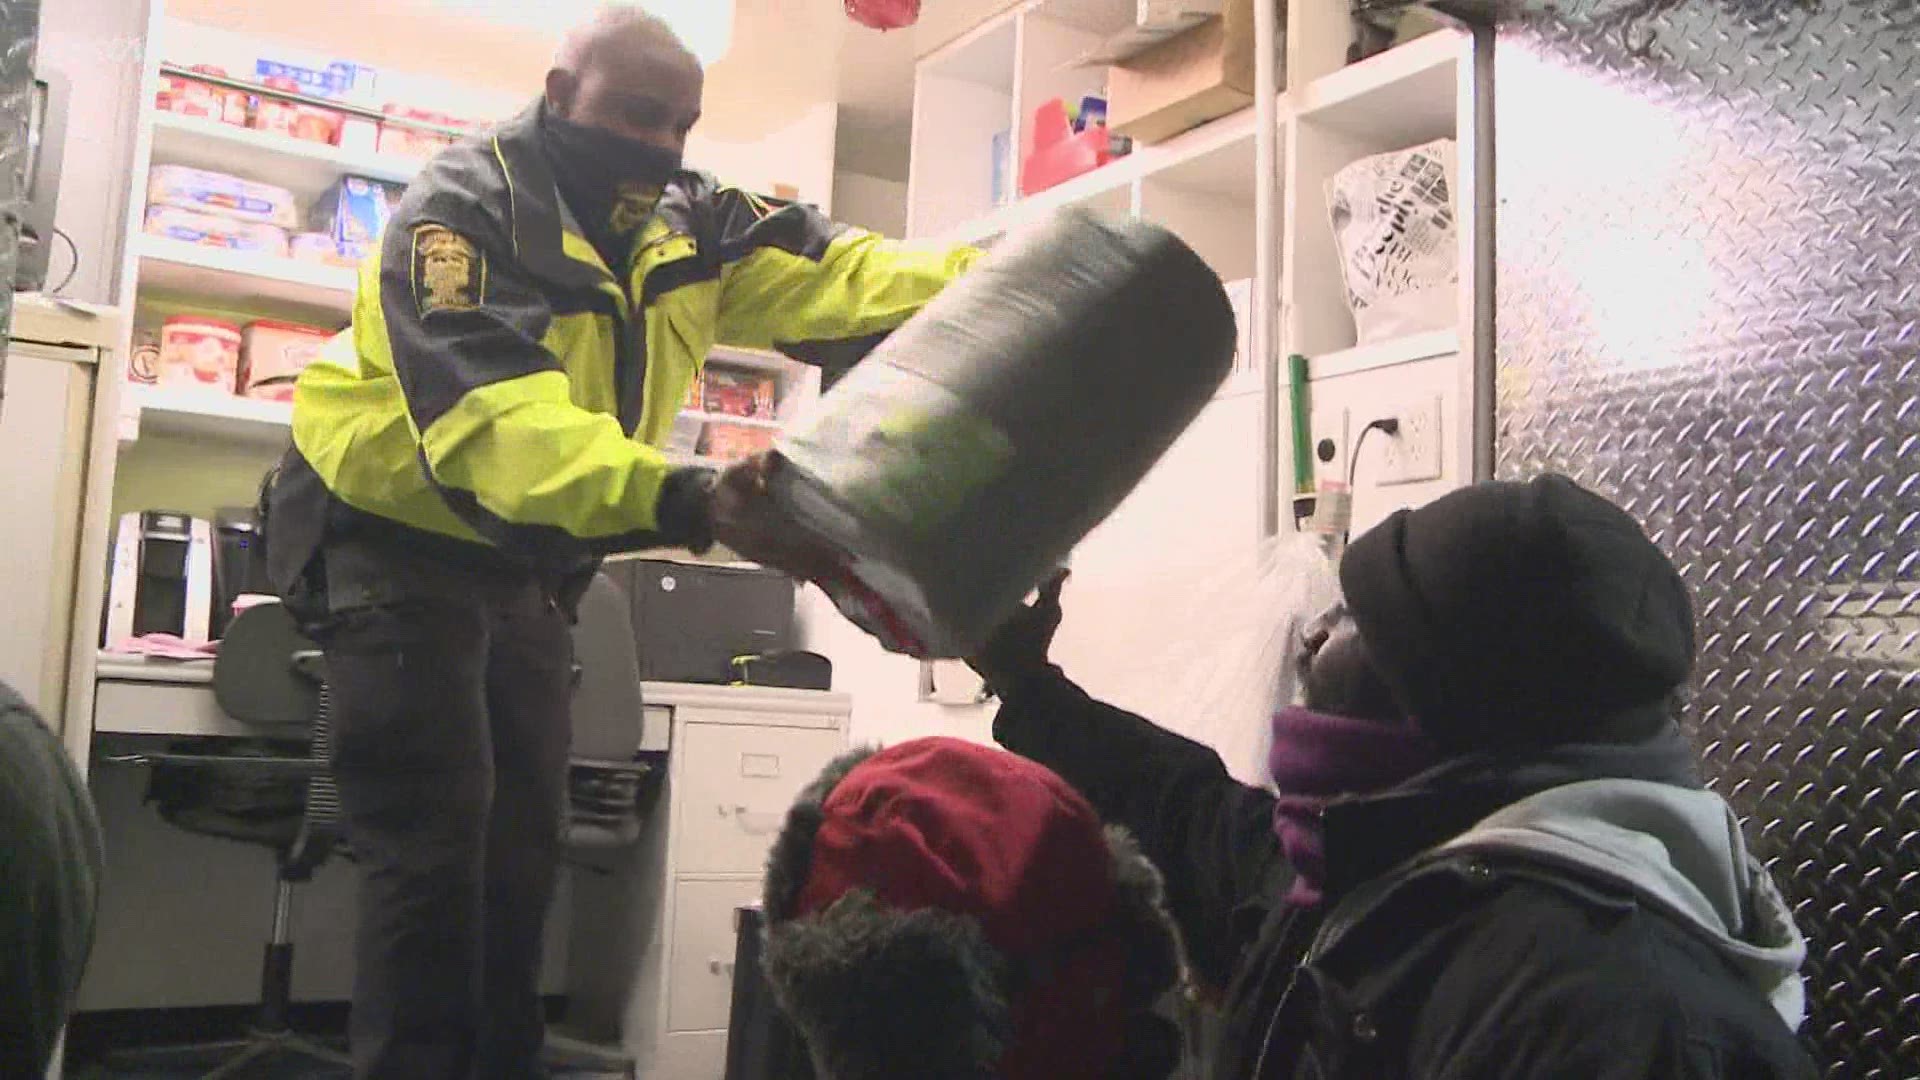 Hartford Police Officer says there needs to be more awareness for those in need